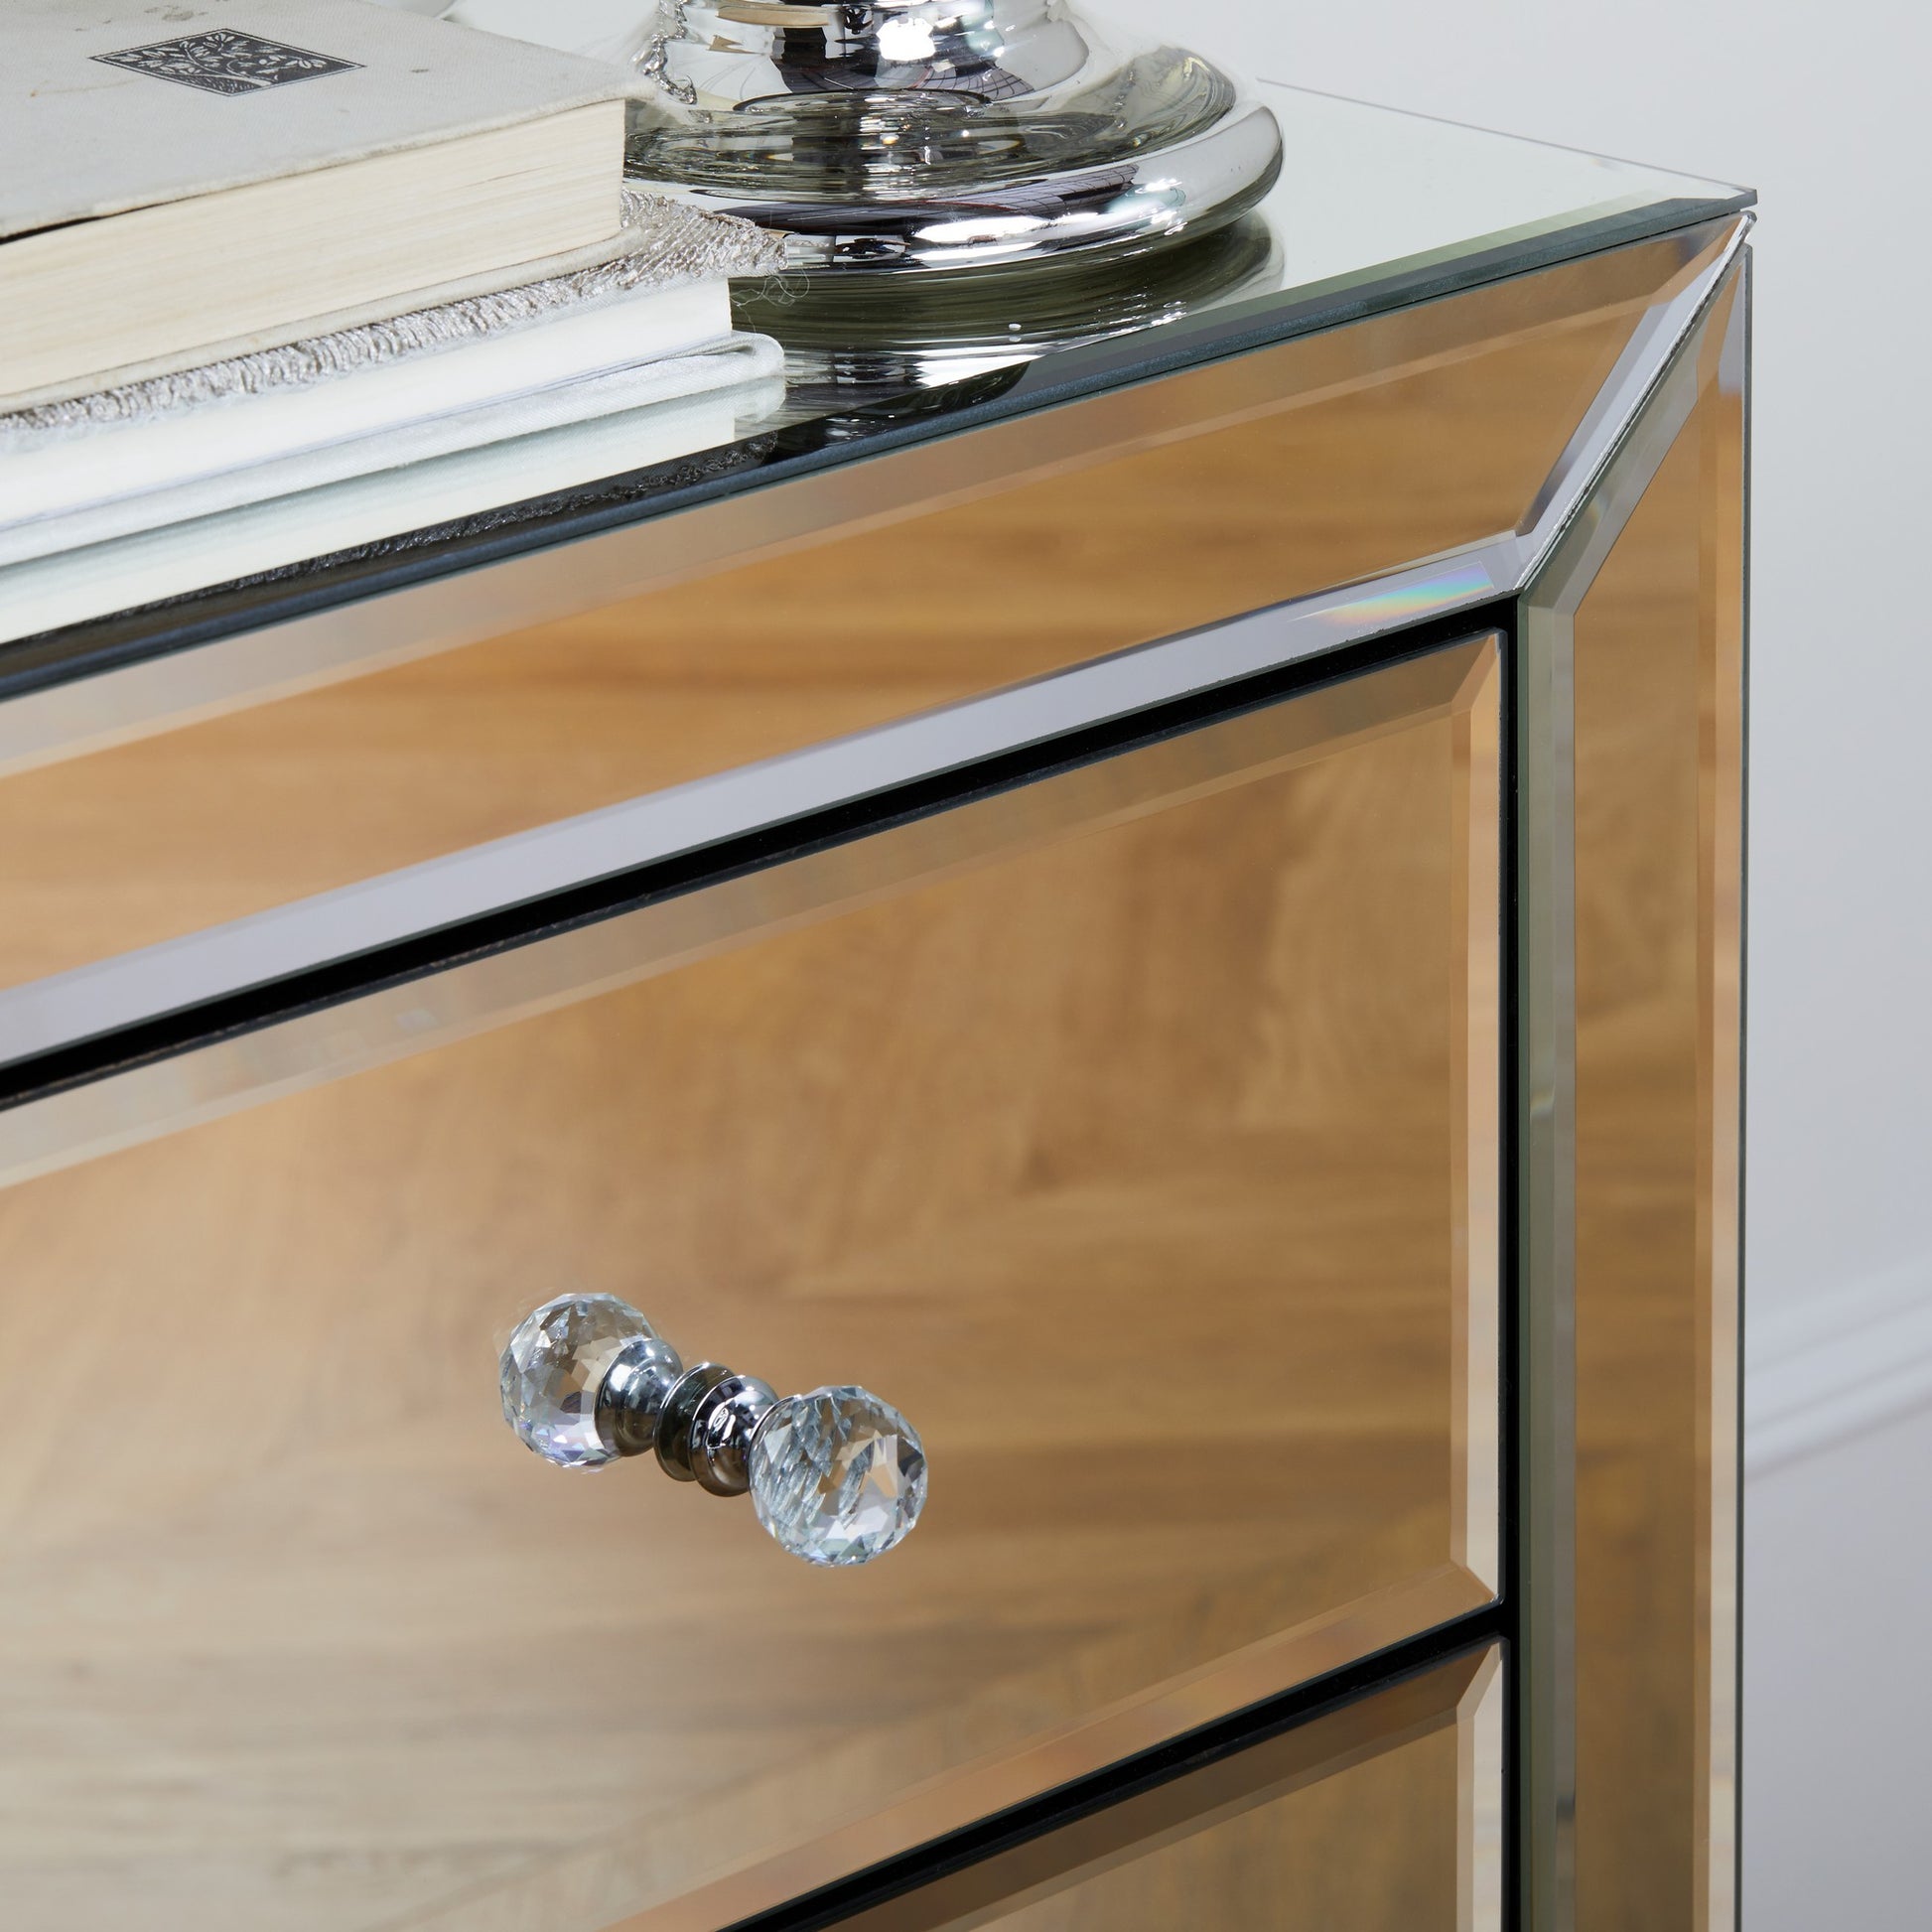 Birlea Palermo Range 2-Drawer Bedside Table with Mirrored Finish, Bevelled Edges, and Mock Crystal Handles